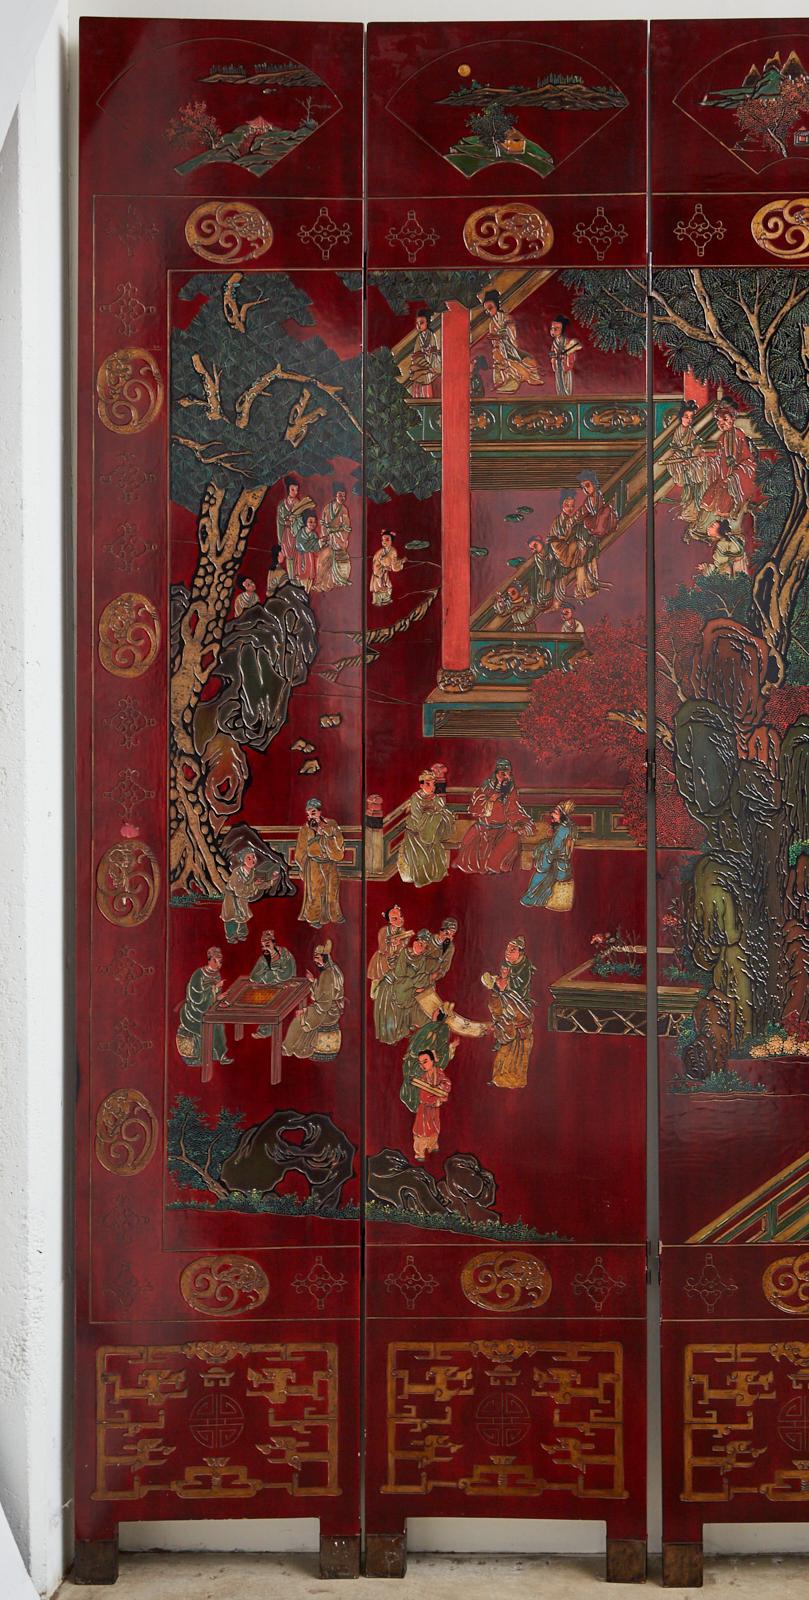 Very impressive monumental Chinese export twelve-panel Coromandel screen depicting a lush courtyard with figures involved in leisurely activities. The panels are incised and lacquered with vibrant colors and gilt over a dramatic dark red background.